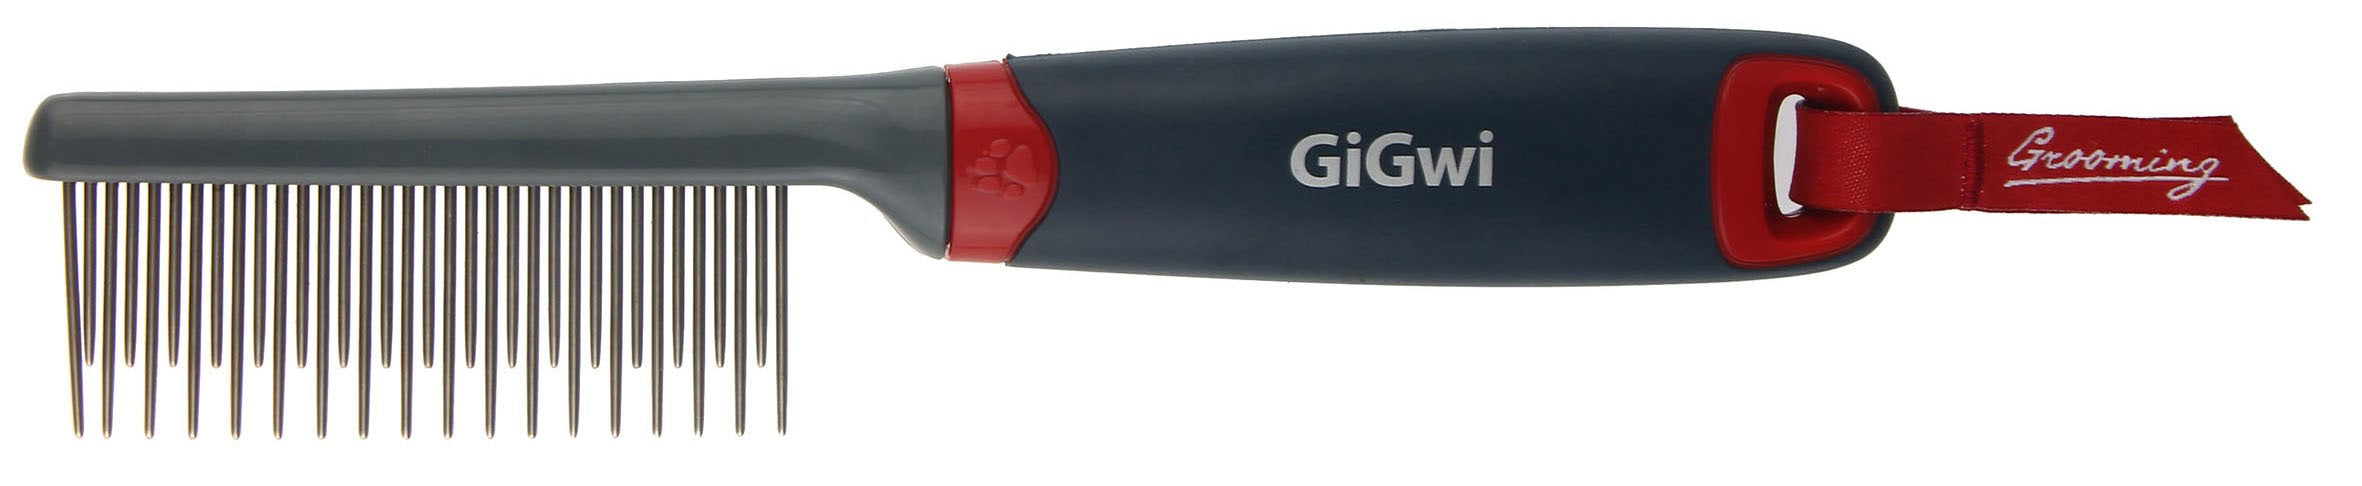 Gigwi Grooming Regular Comb For Dogs & Cats